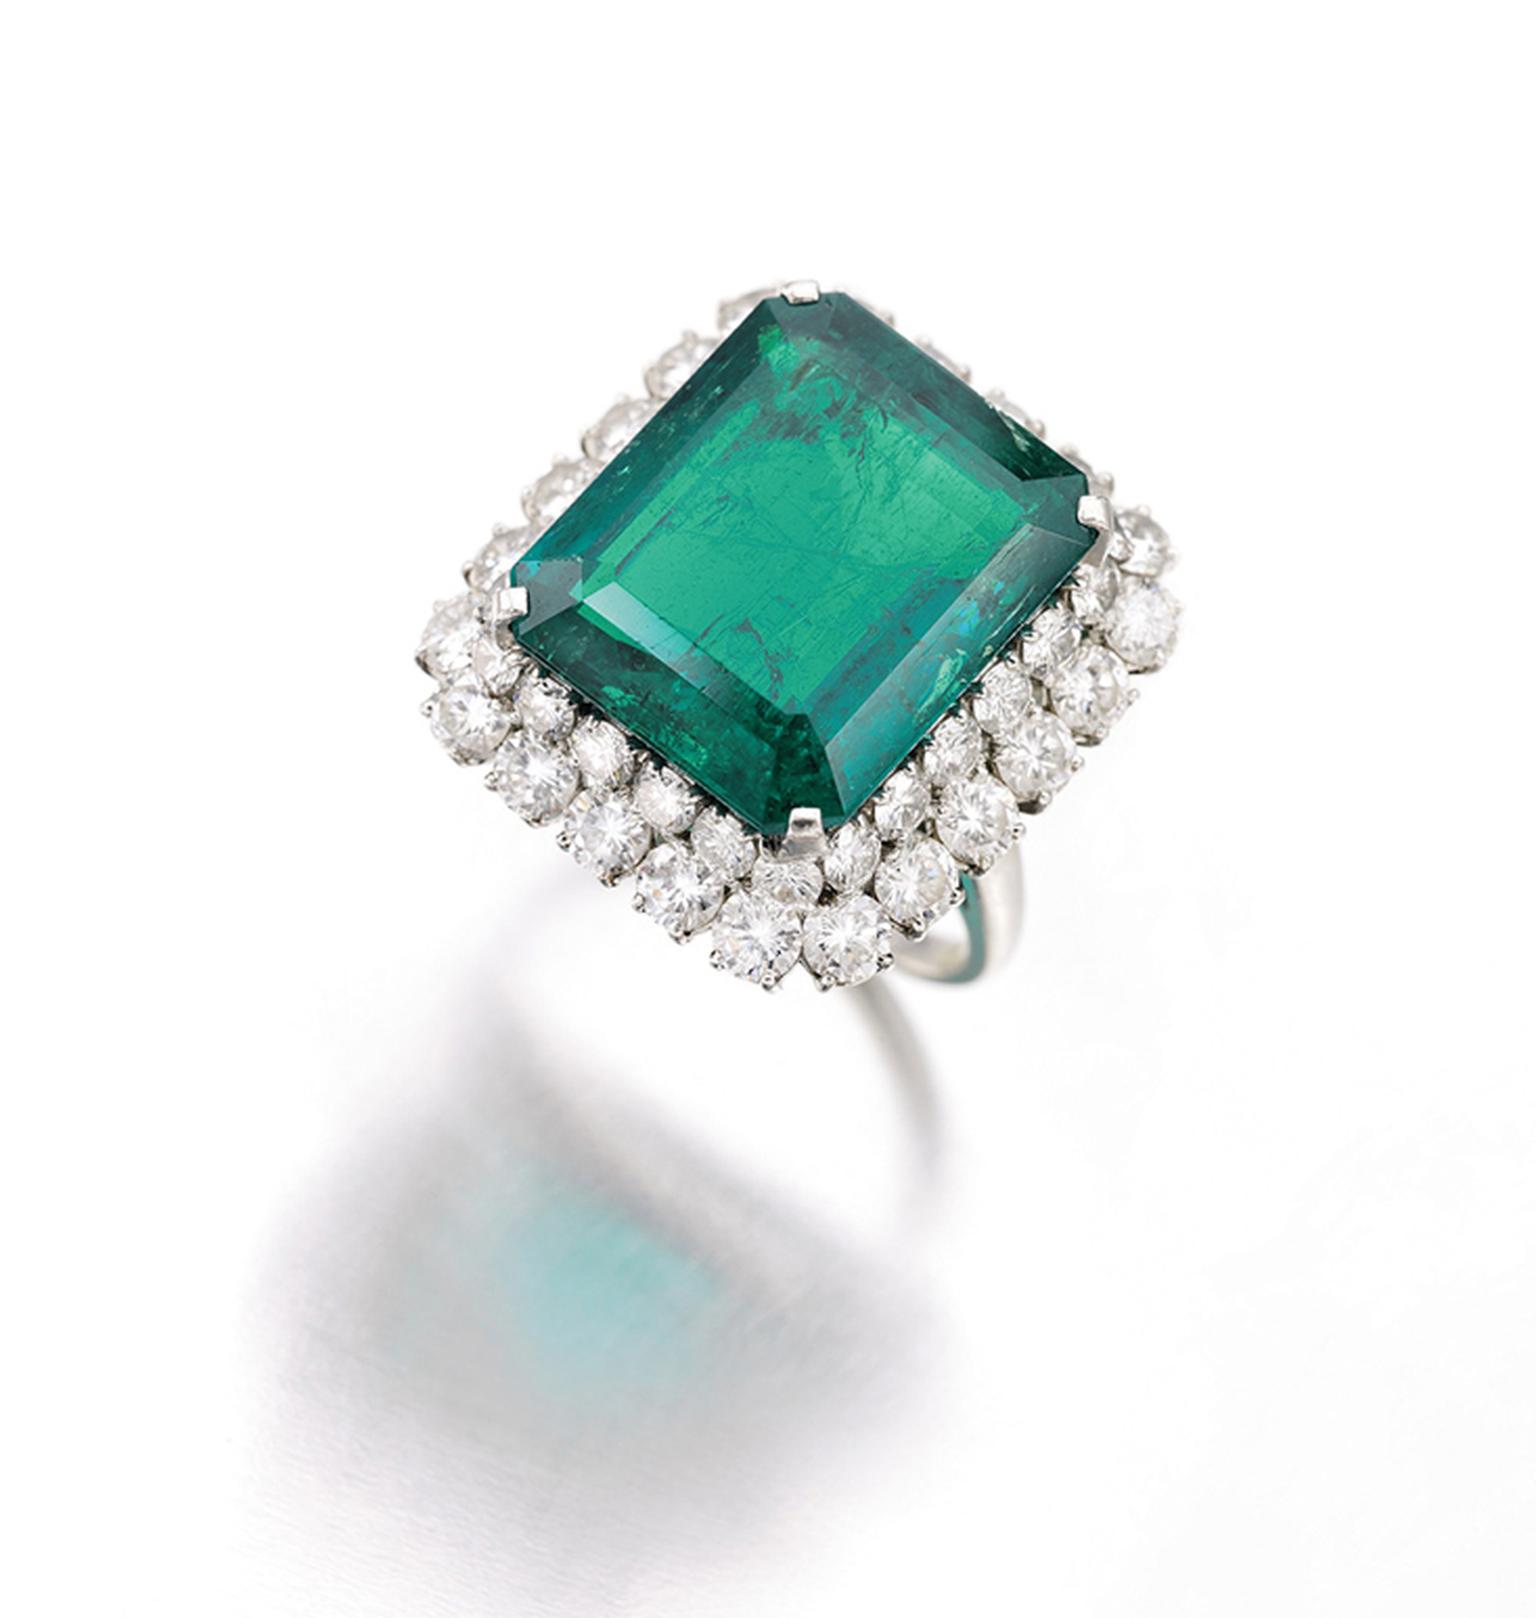 An emerald and diamond ring by Bulgari, circa 1964, set with a 16.62ct step-cut emerald, that belonged to Gina Lollobrigida. It sold for CHF 173,000 at Sotheby's Geneva in May 2013.